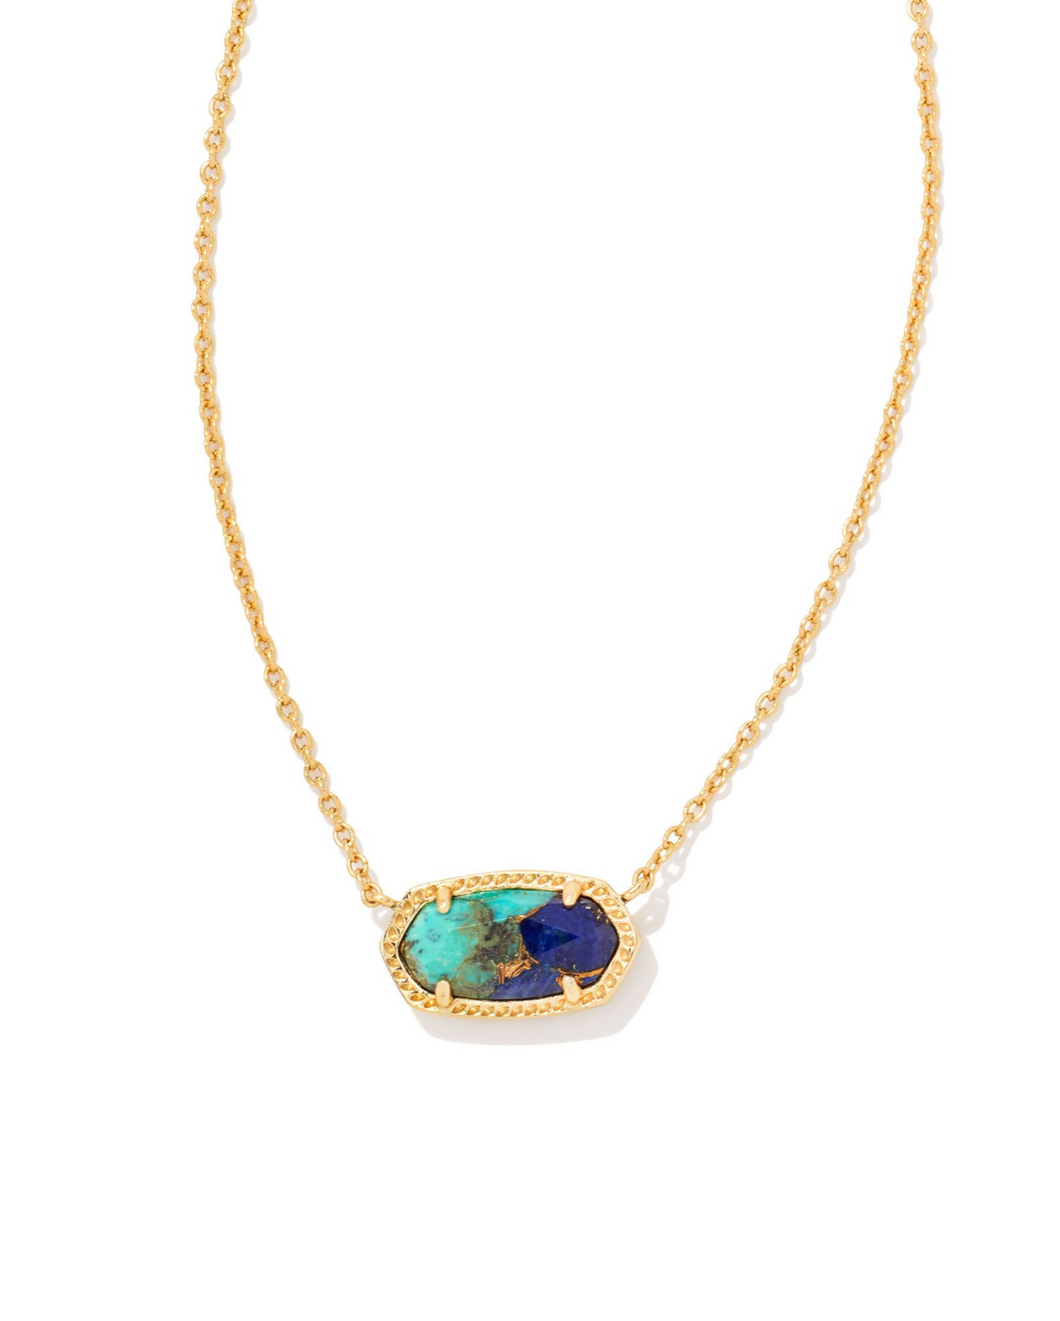 Elisa Gold Pendant Necklace in Bronze Veined Lapis Turquoise Magnesite by Kendra Scott